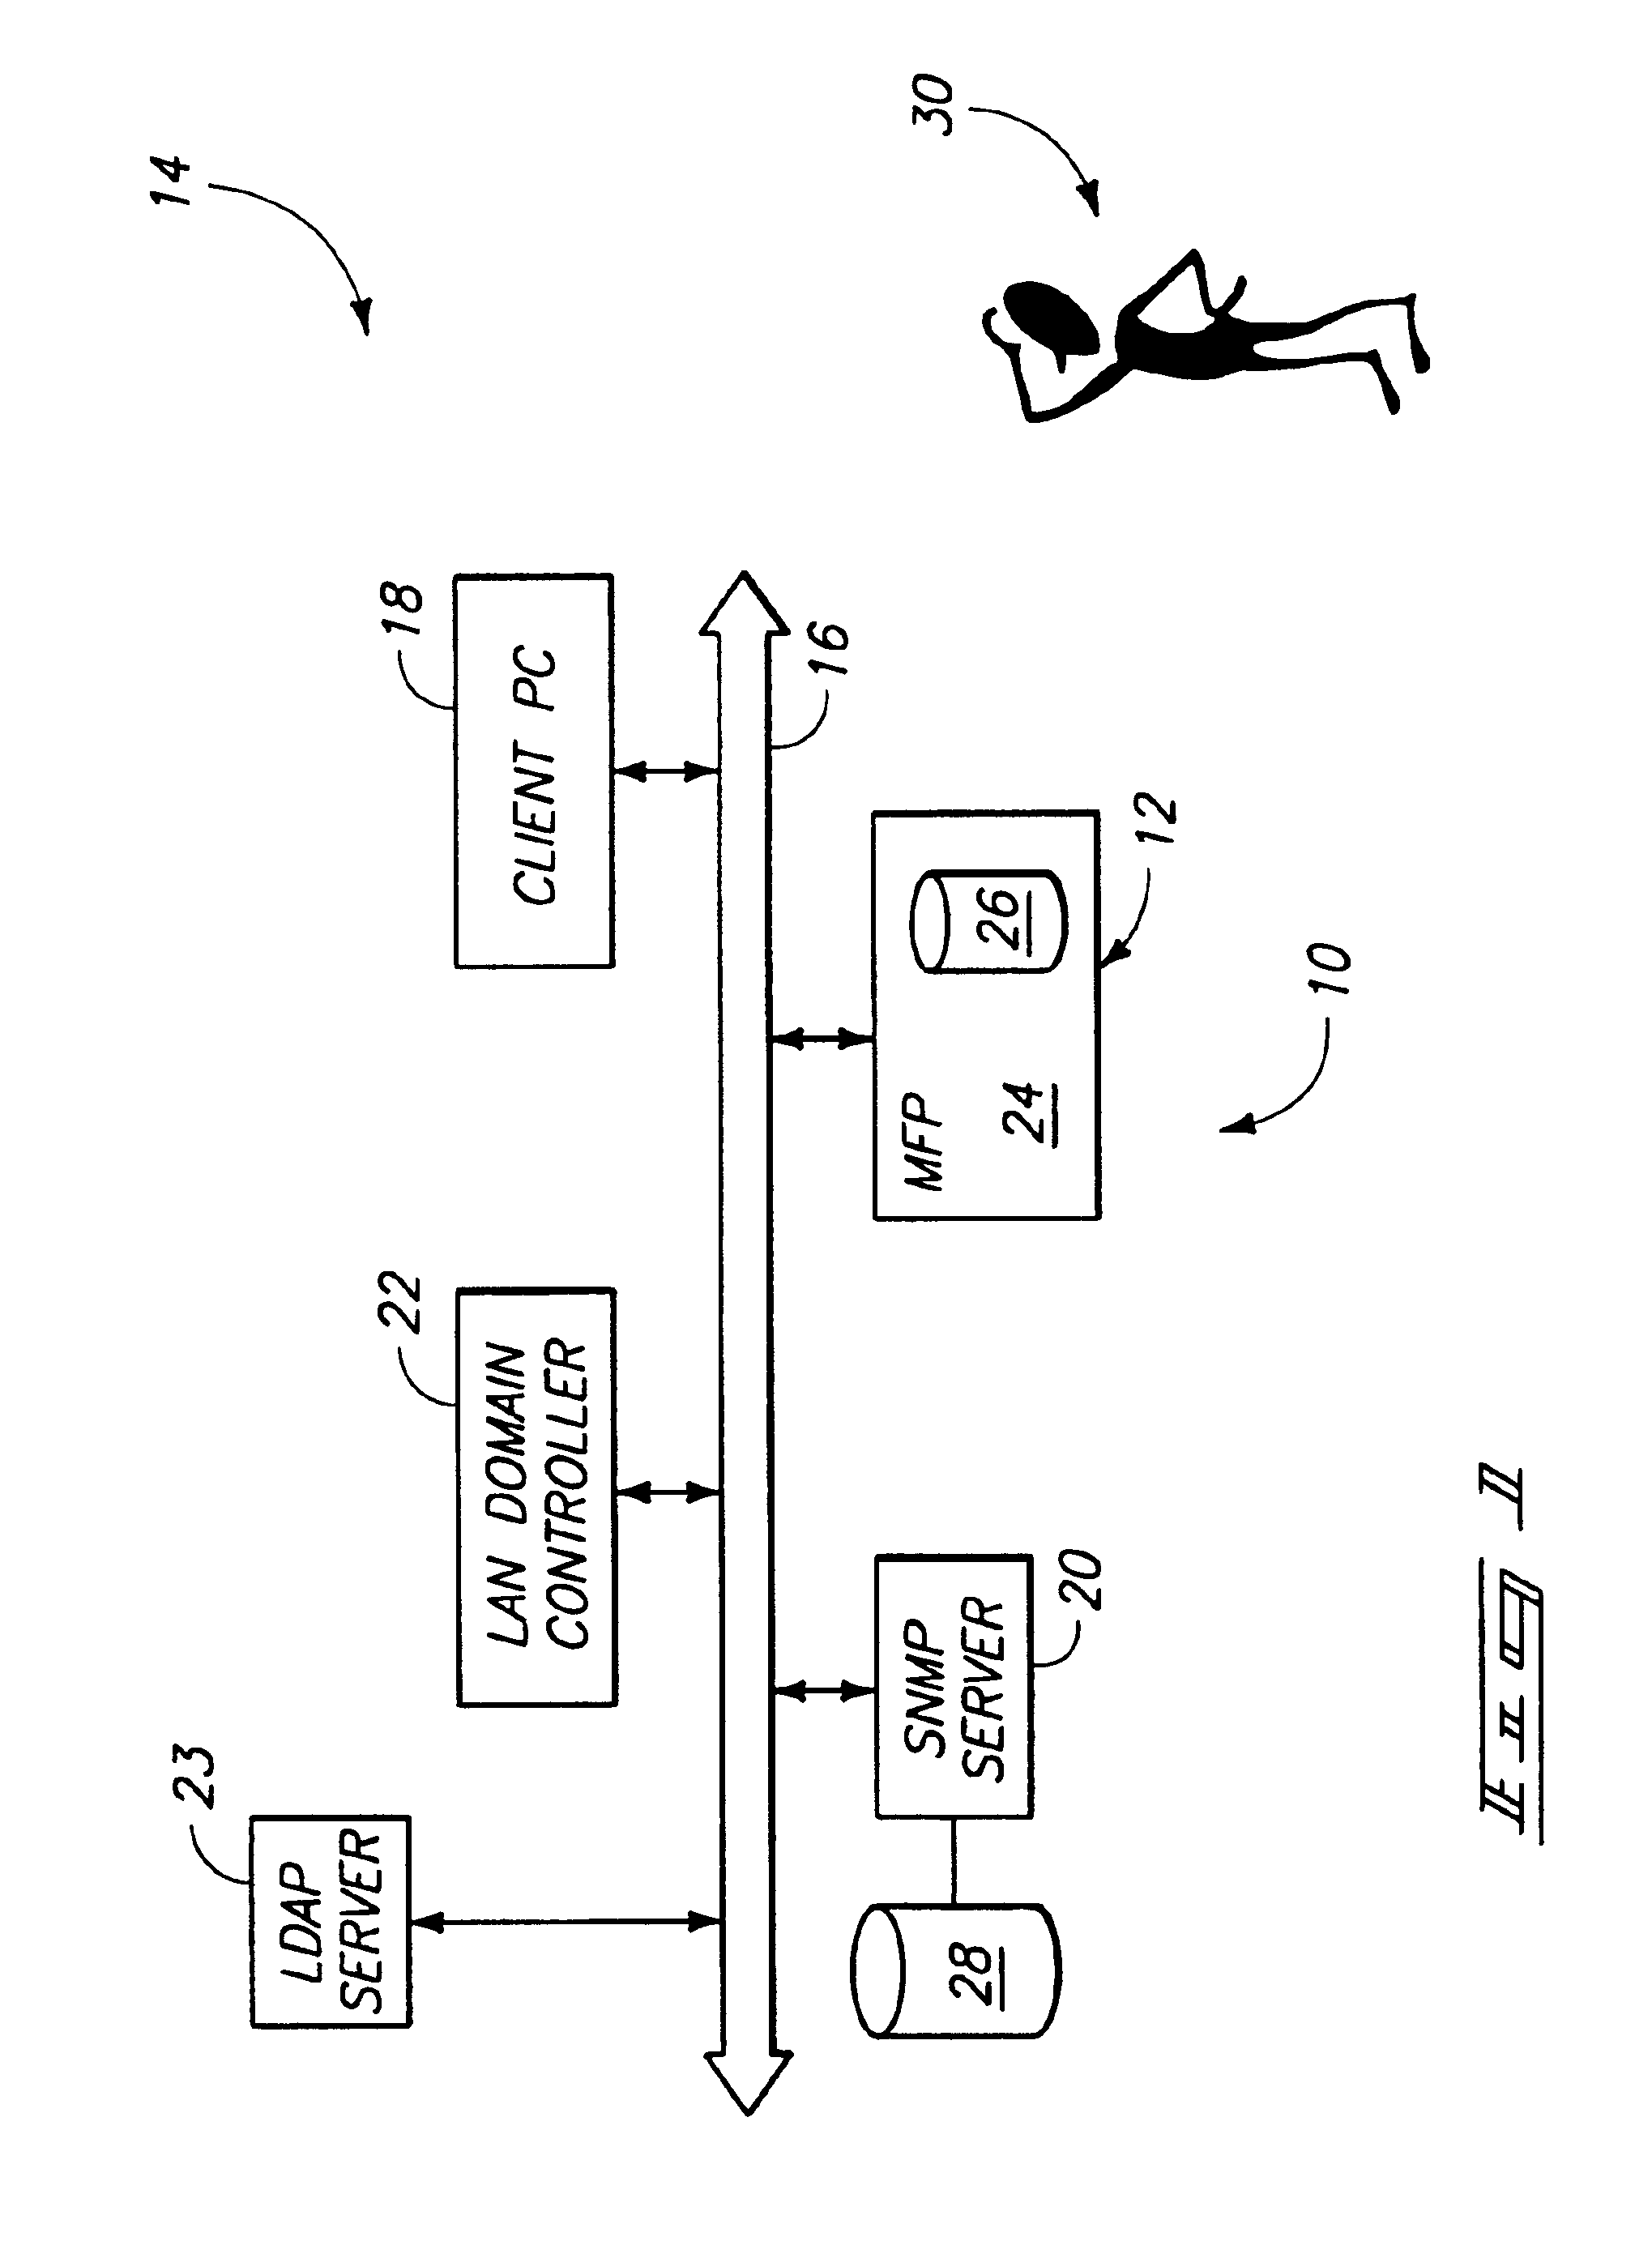 Hard copy cost recovery systems, an apparatus for tracking usage information for a hard copy device, hard copy devices, and a usage accounting method